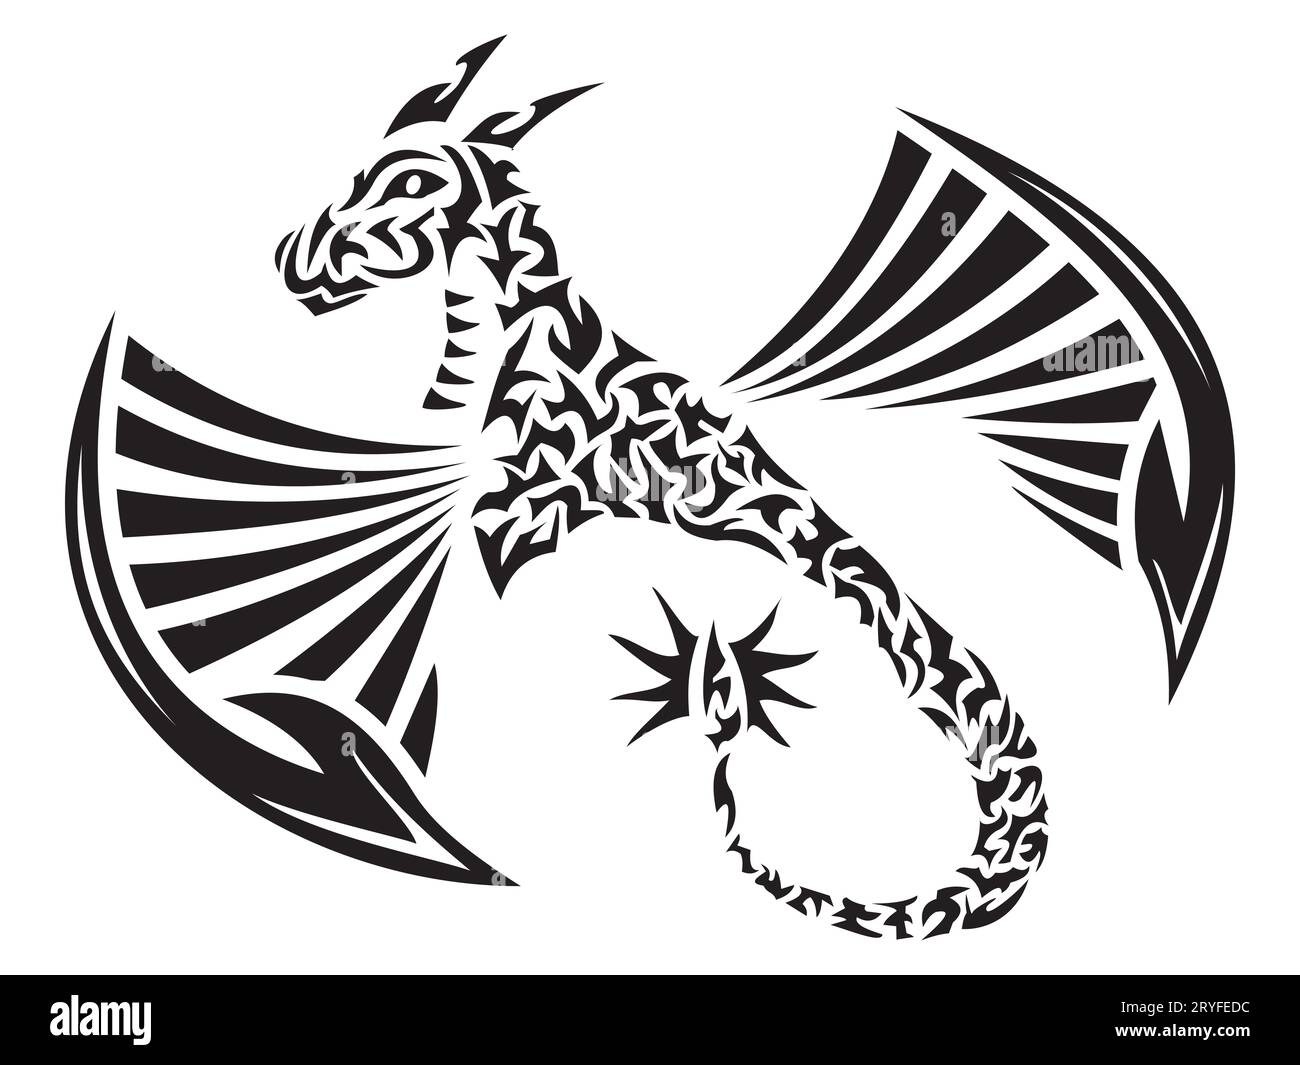 Illustration of a Winged Dragon in tribal tattoo style Stock Photo